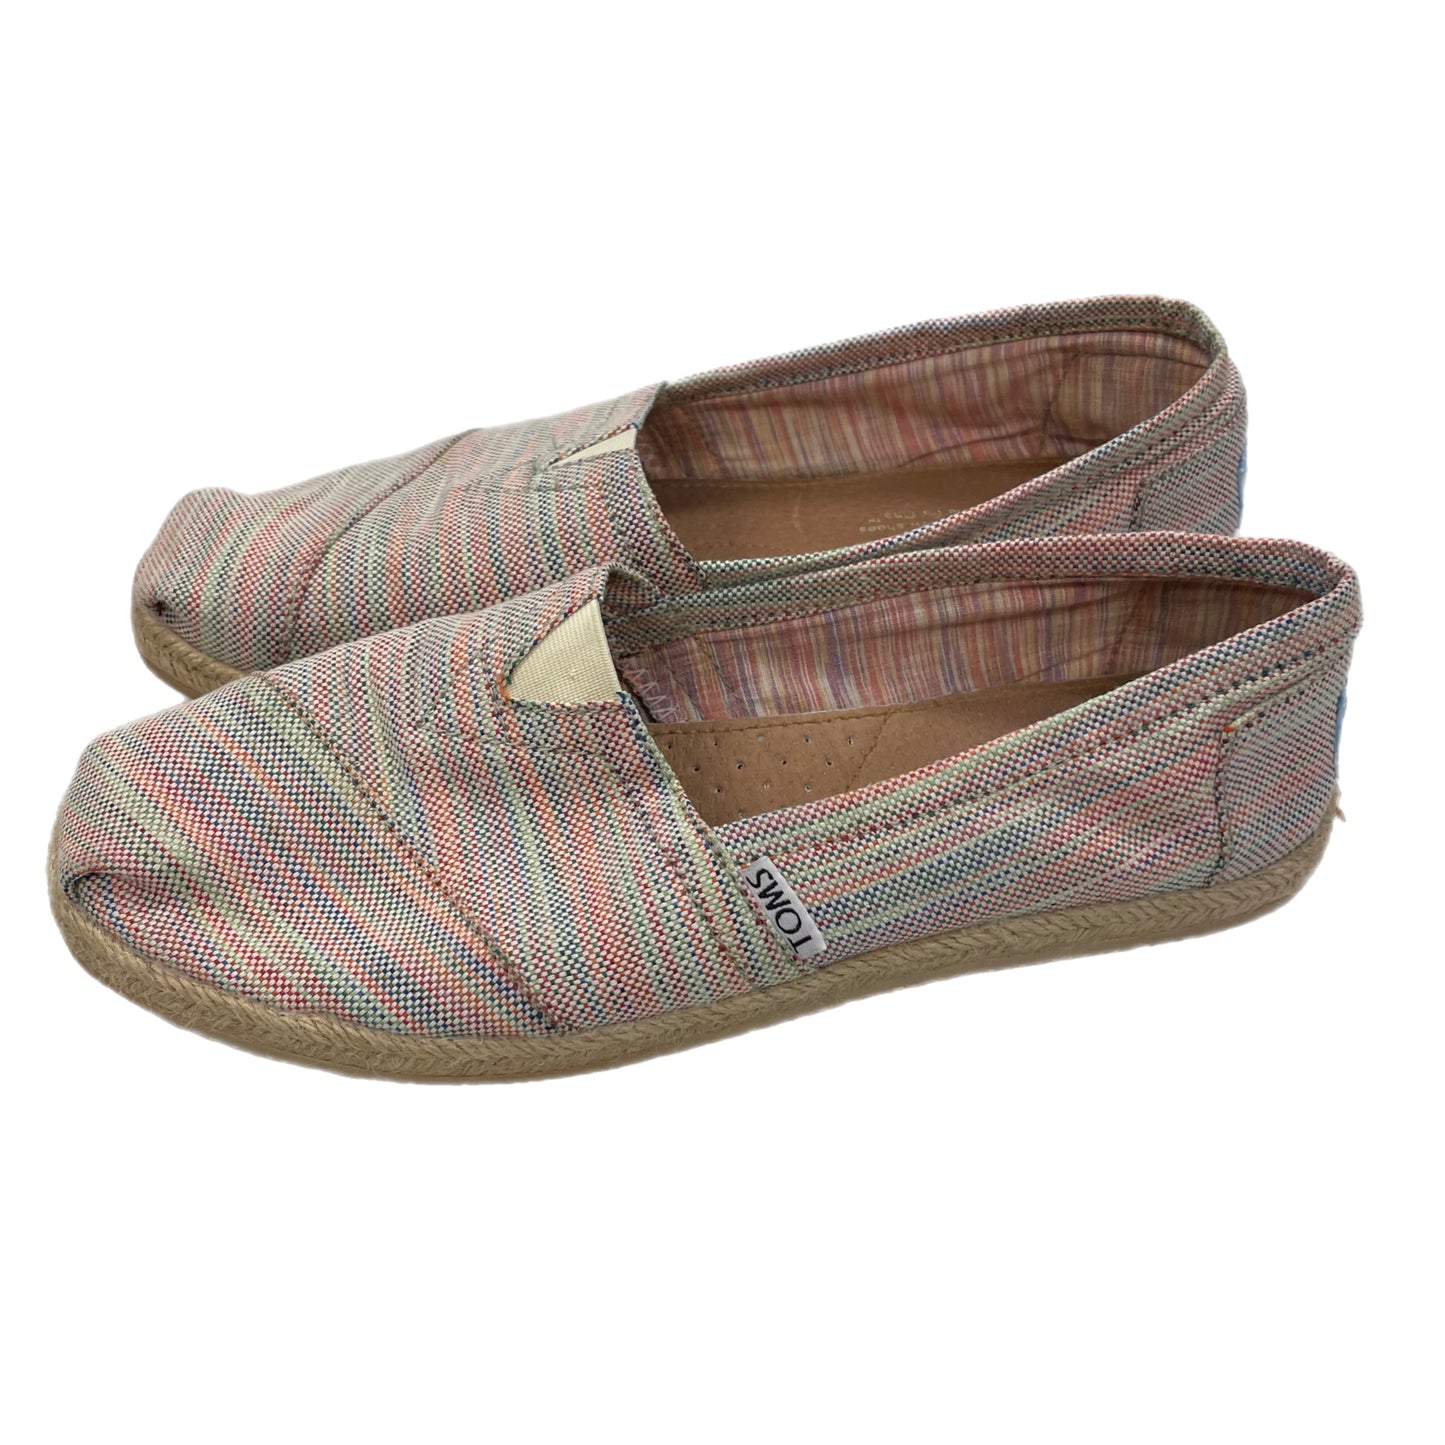 Shoes Flats Espadrille By Toms  Size: 6.5